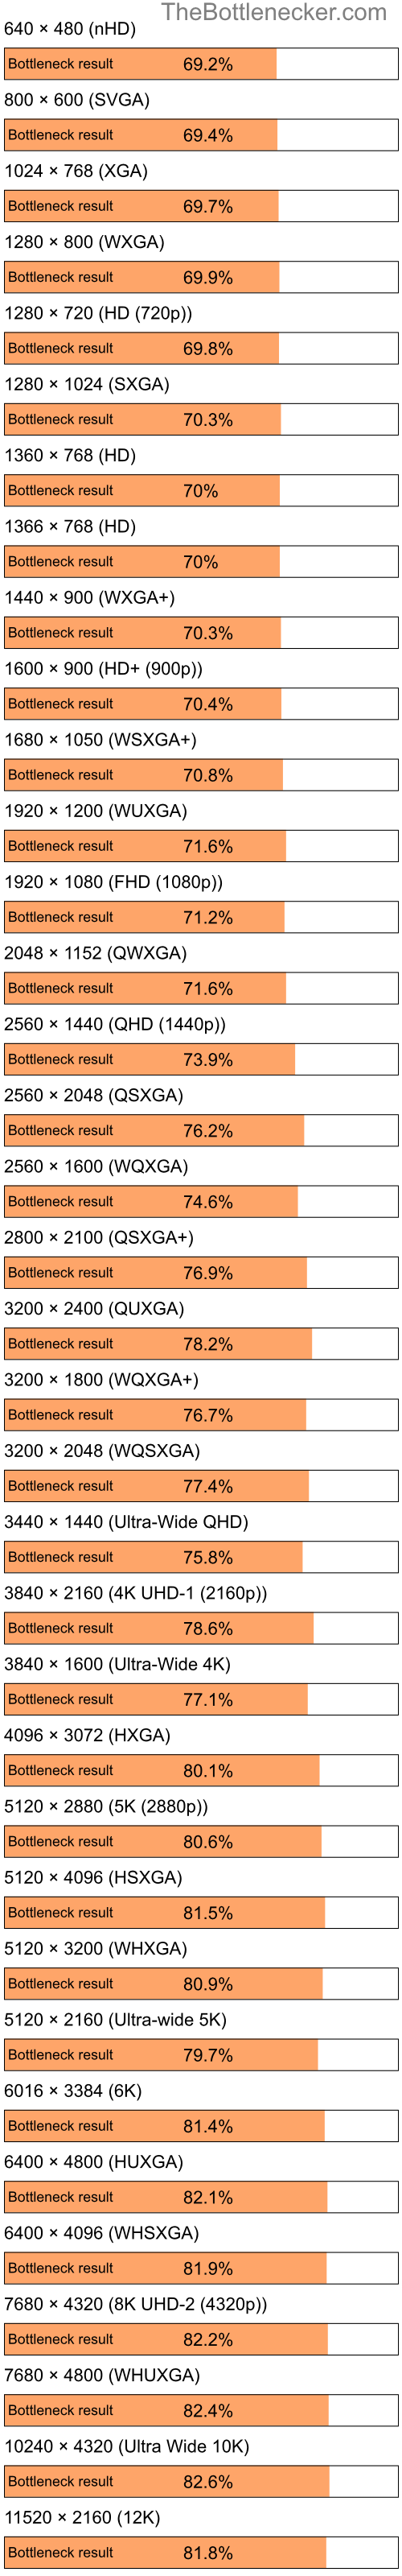 Bottleneck results by resolution for Intel Atom Z520 and AMD Mobility Radeon HD 2400 XT in Graphic Card Intense Tasks